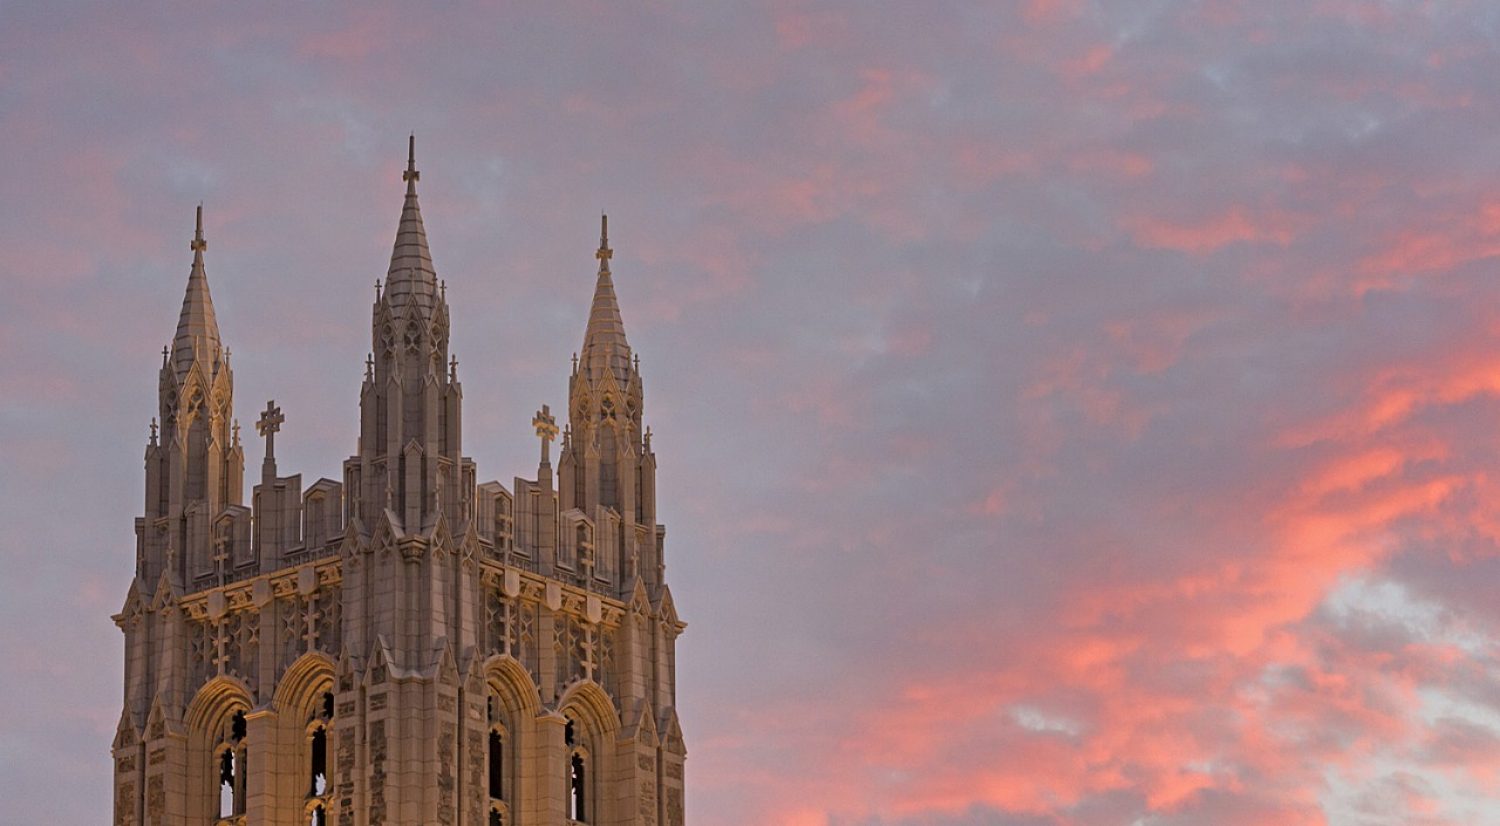 Gasson Tower